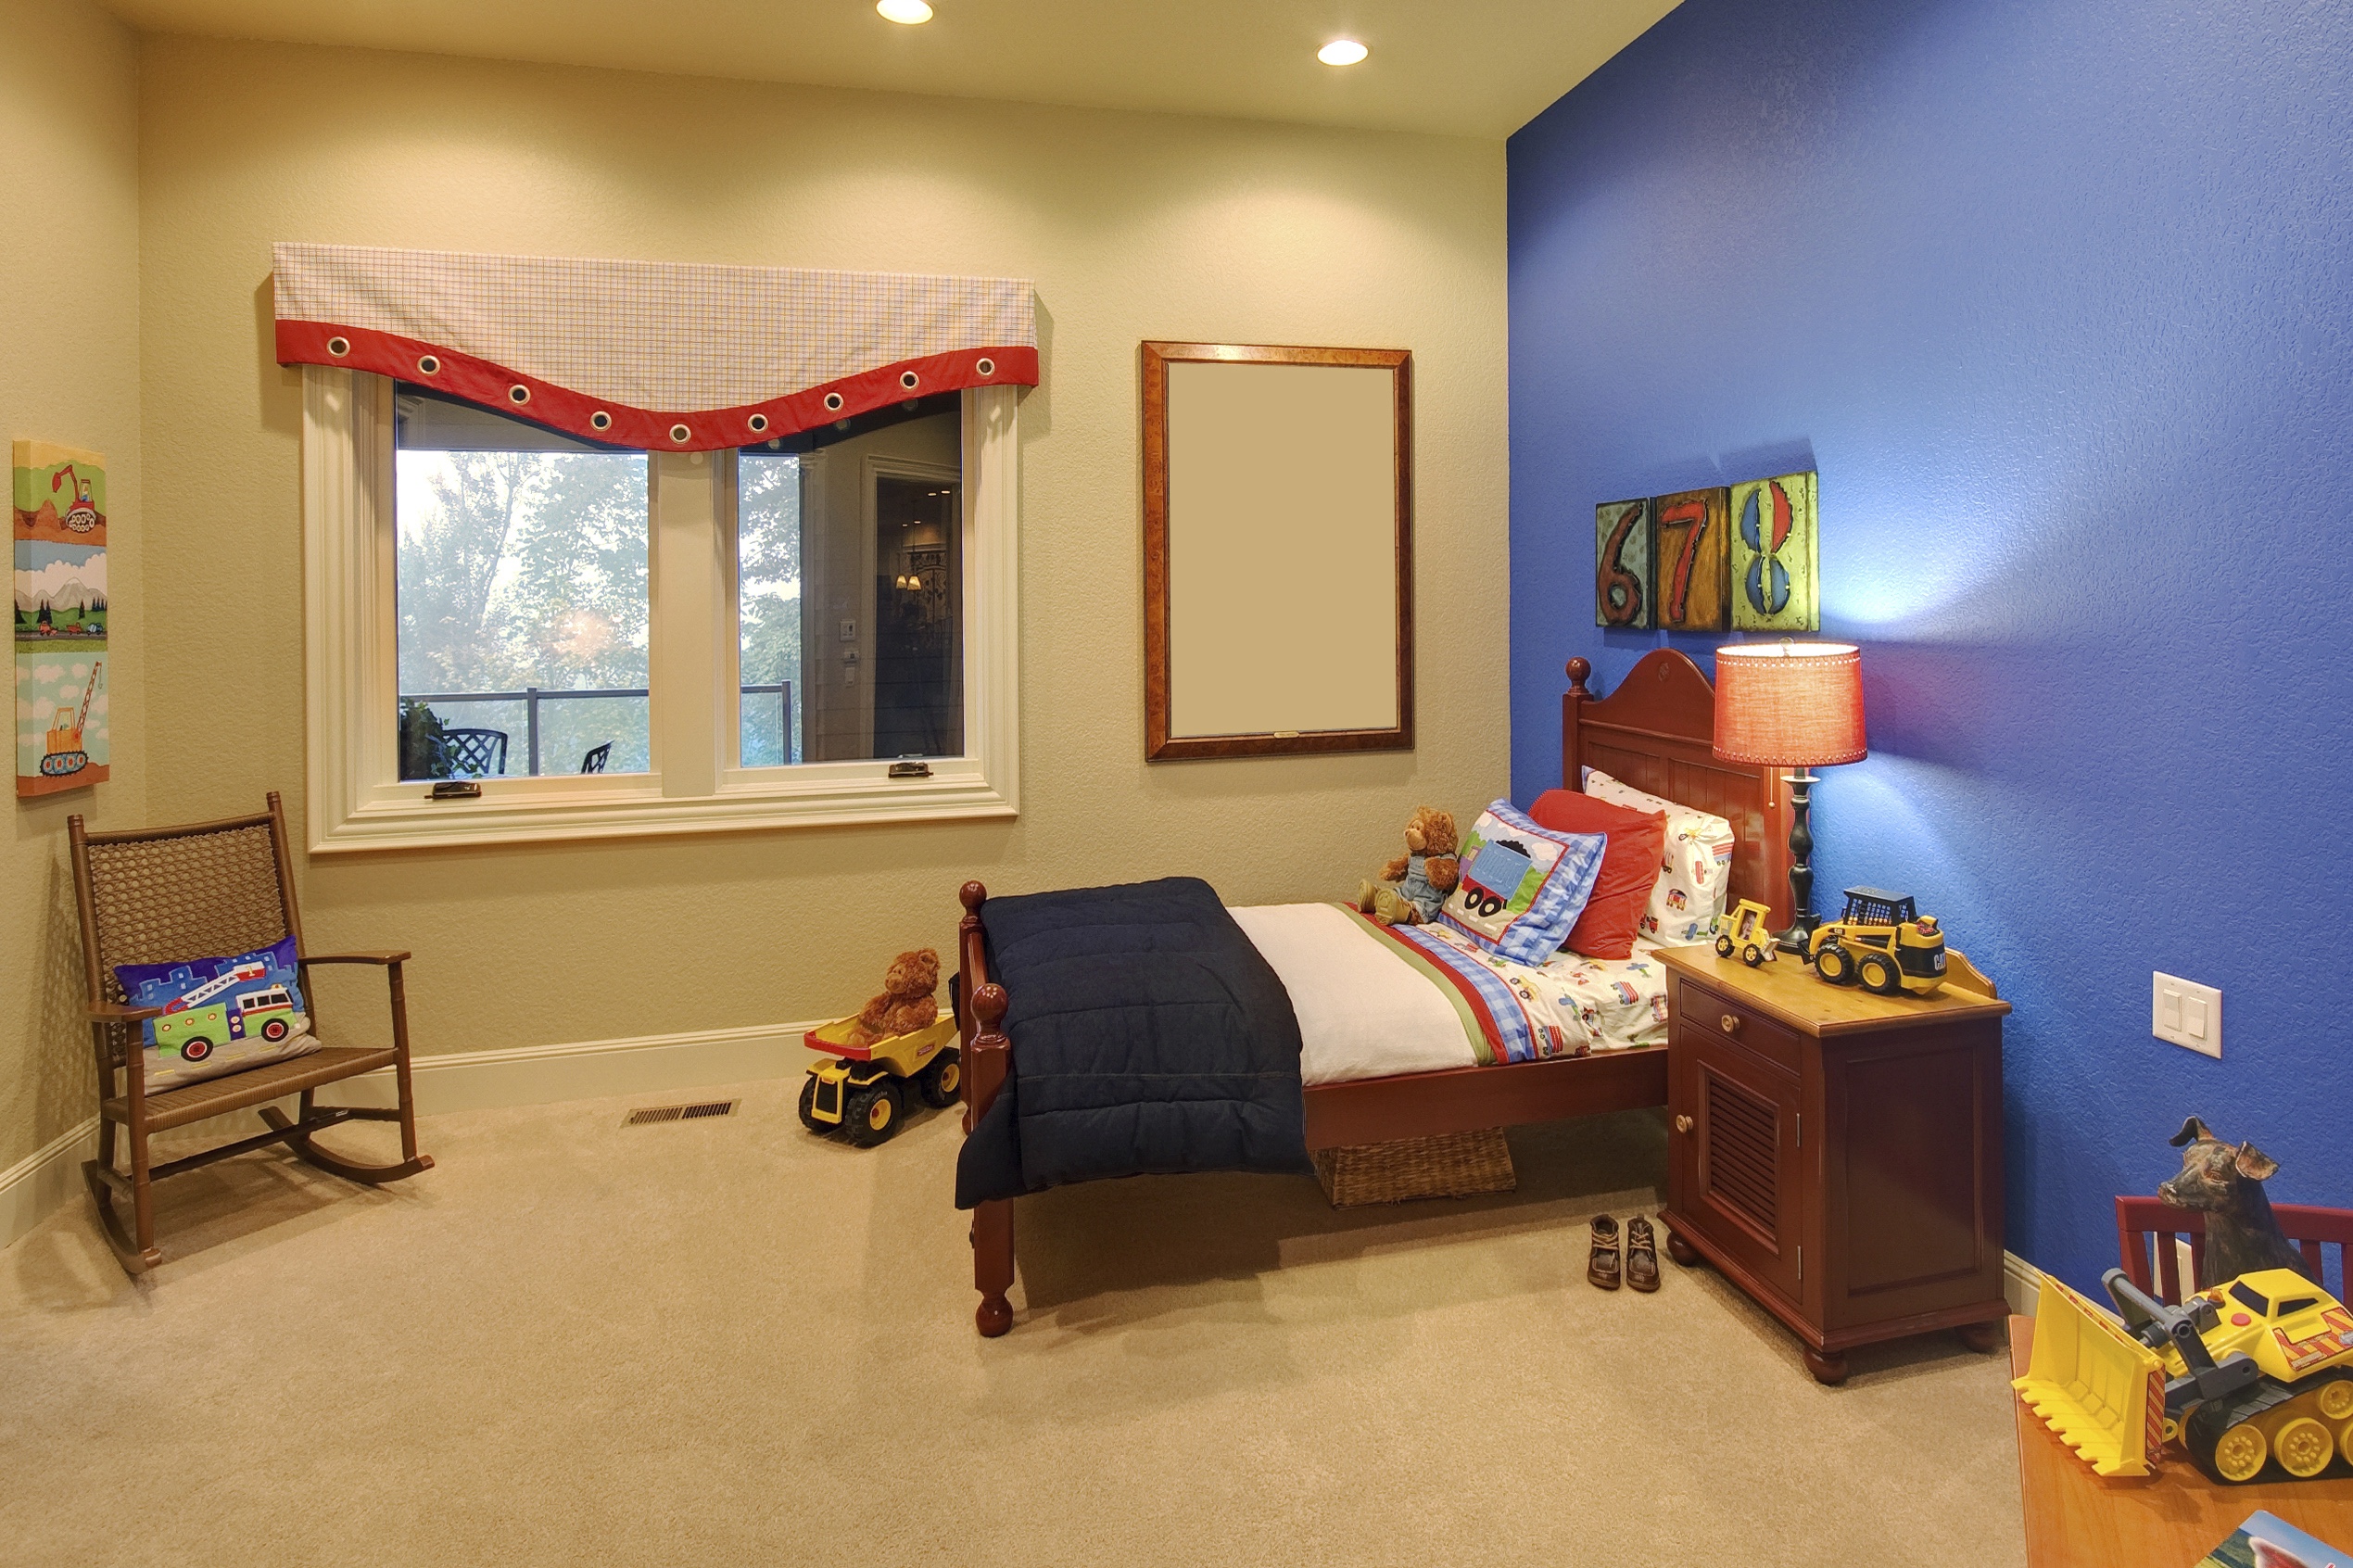 5 Easy Ways to Maximize the Space in Kids’ Rooms - Daily Parent